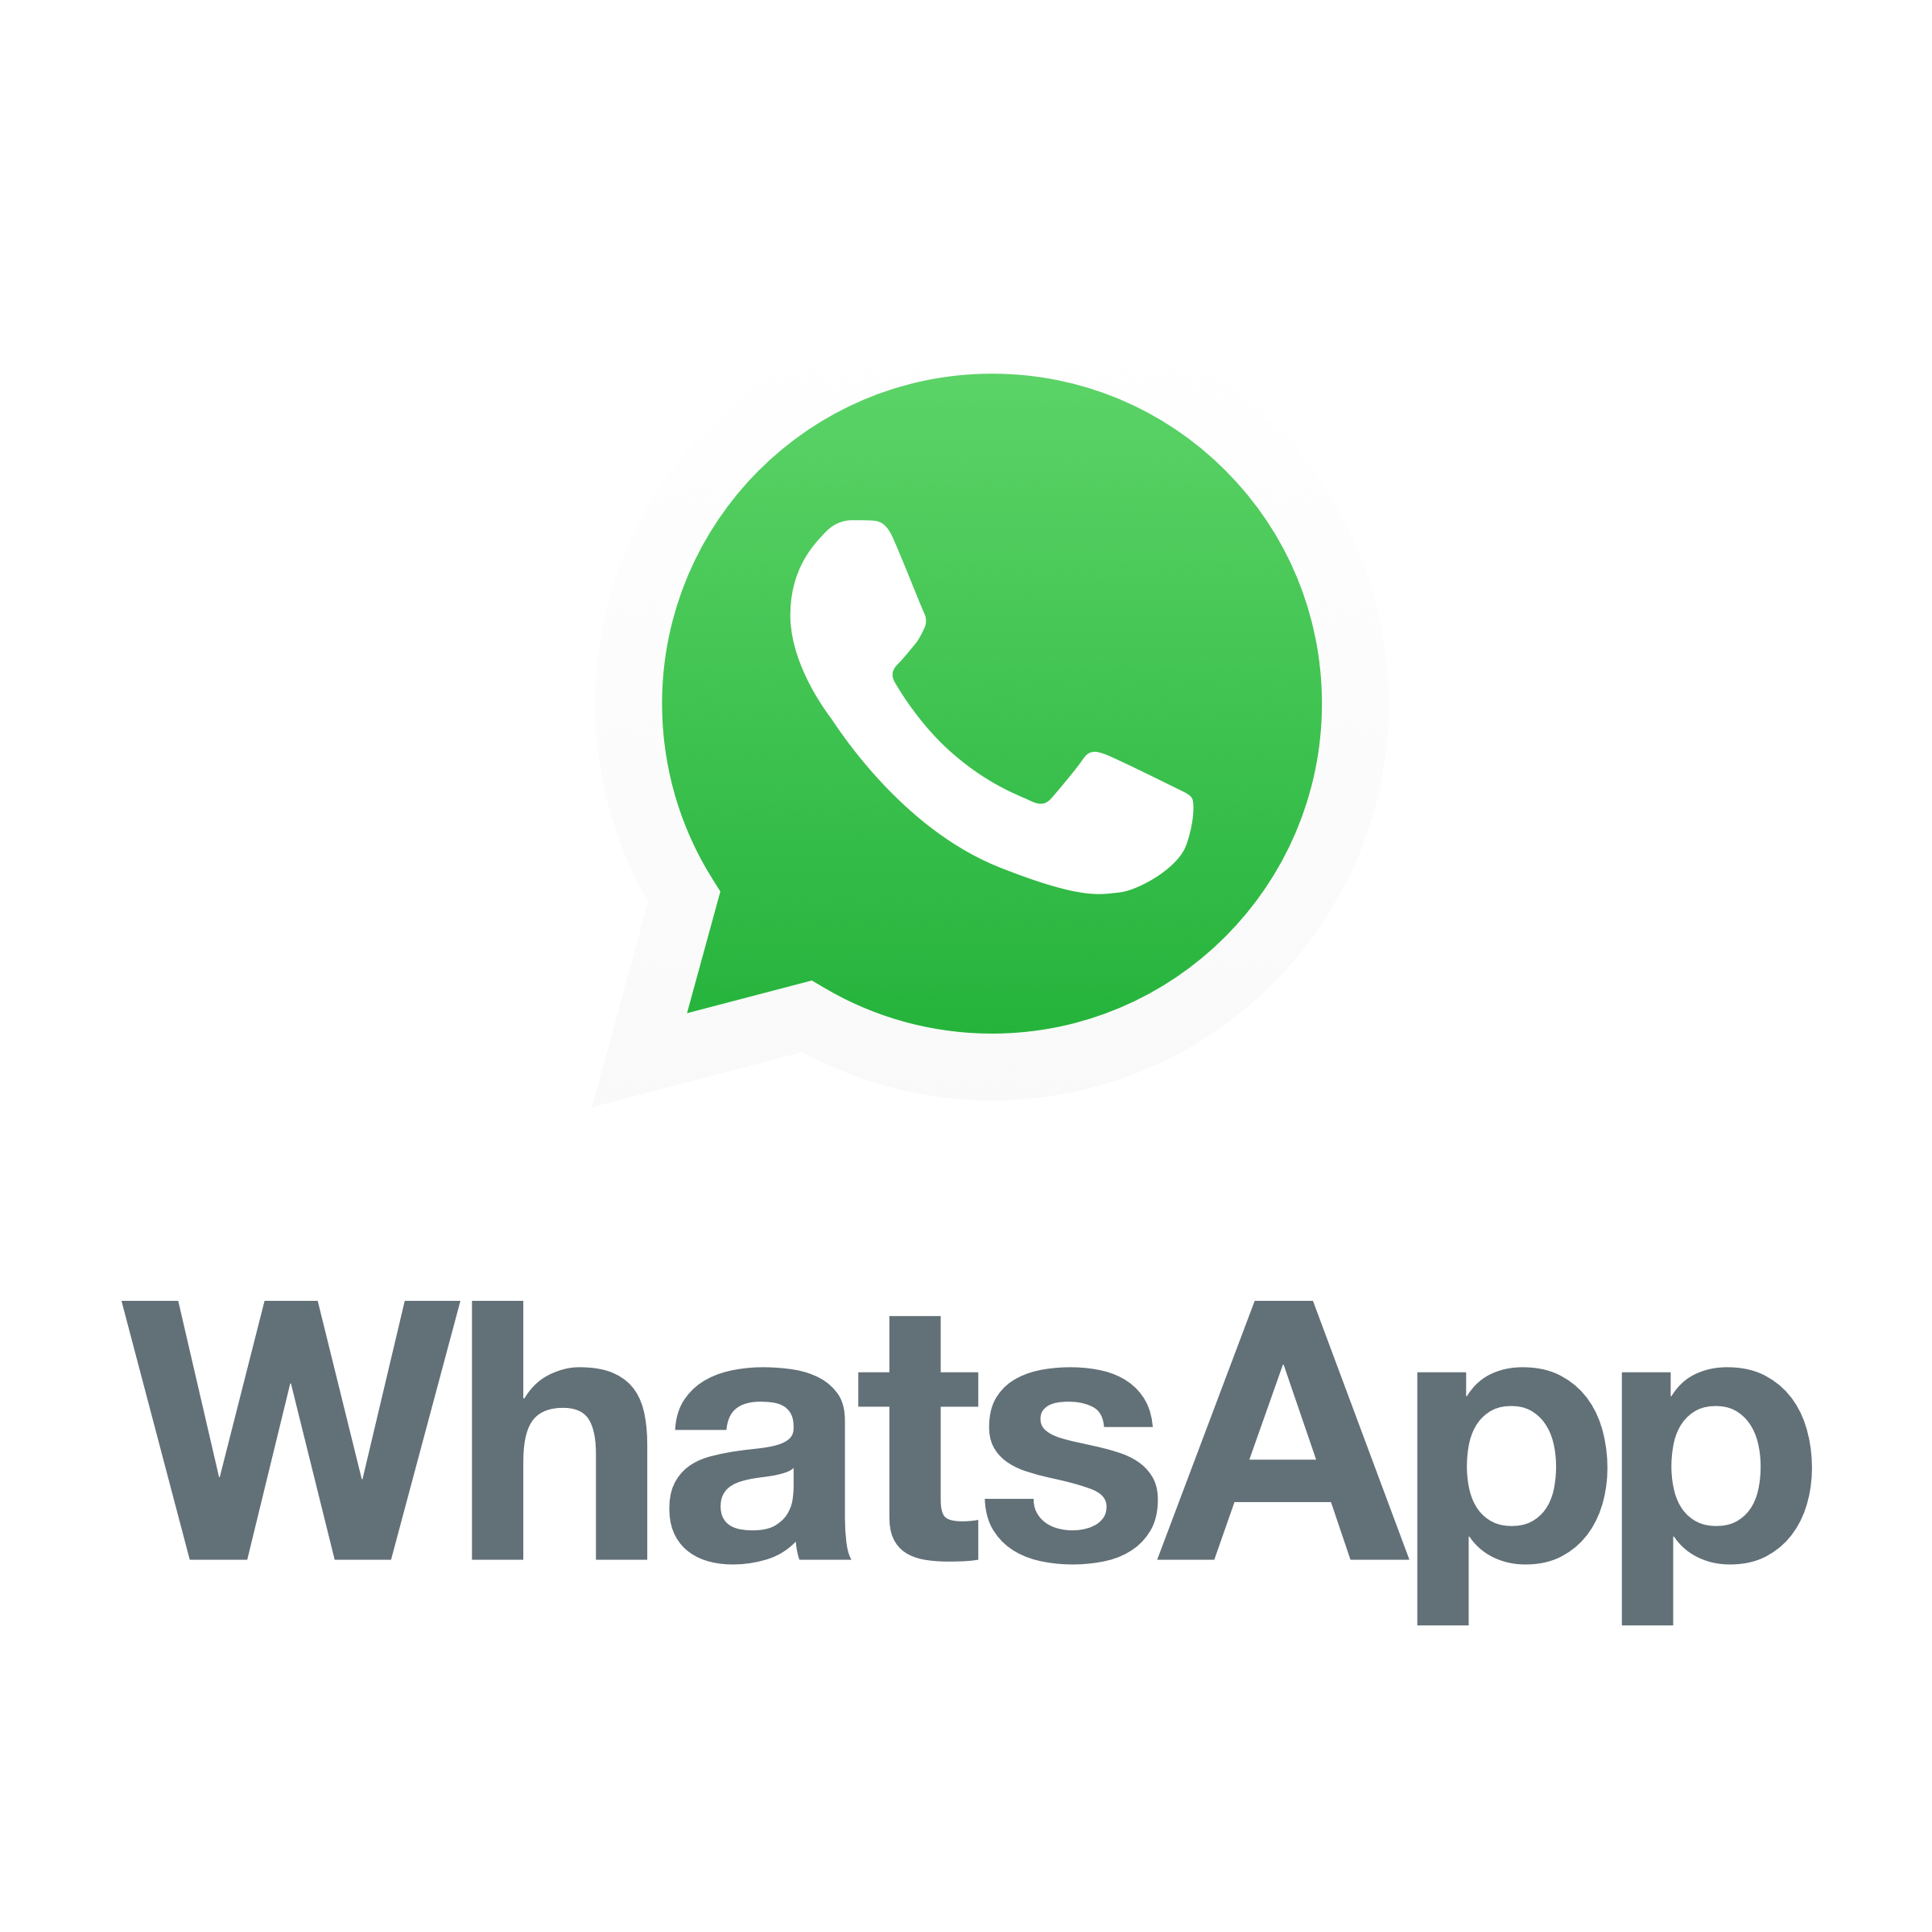 Whats App Logo - Logo Whatsapp PNG File #46053 - Free Icons and PNG Backgrounds